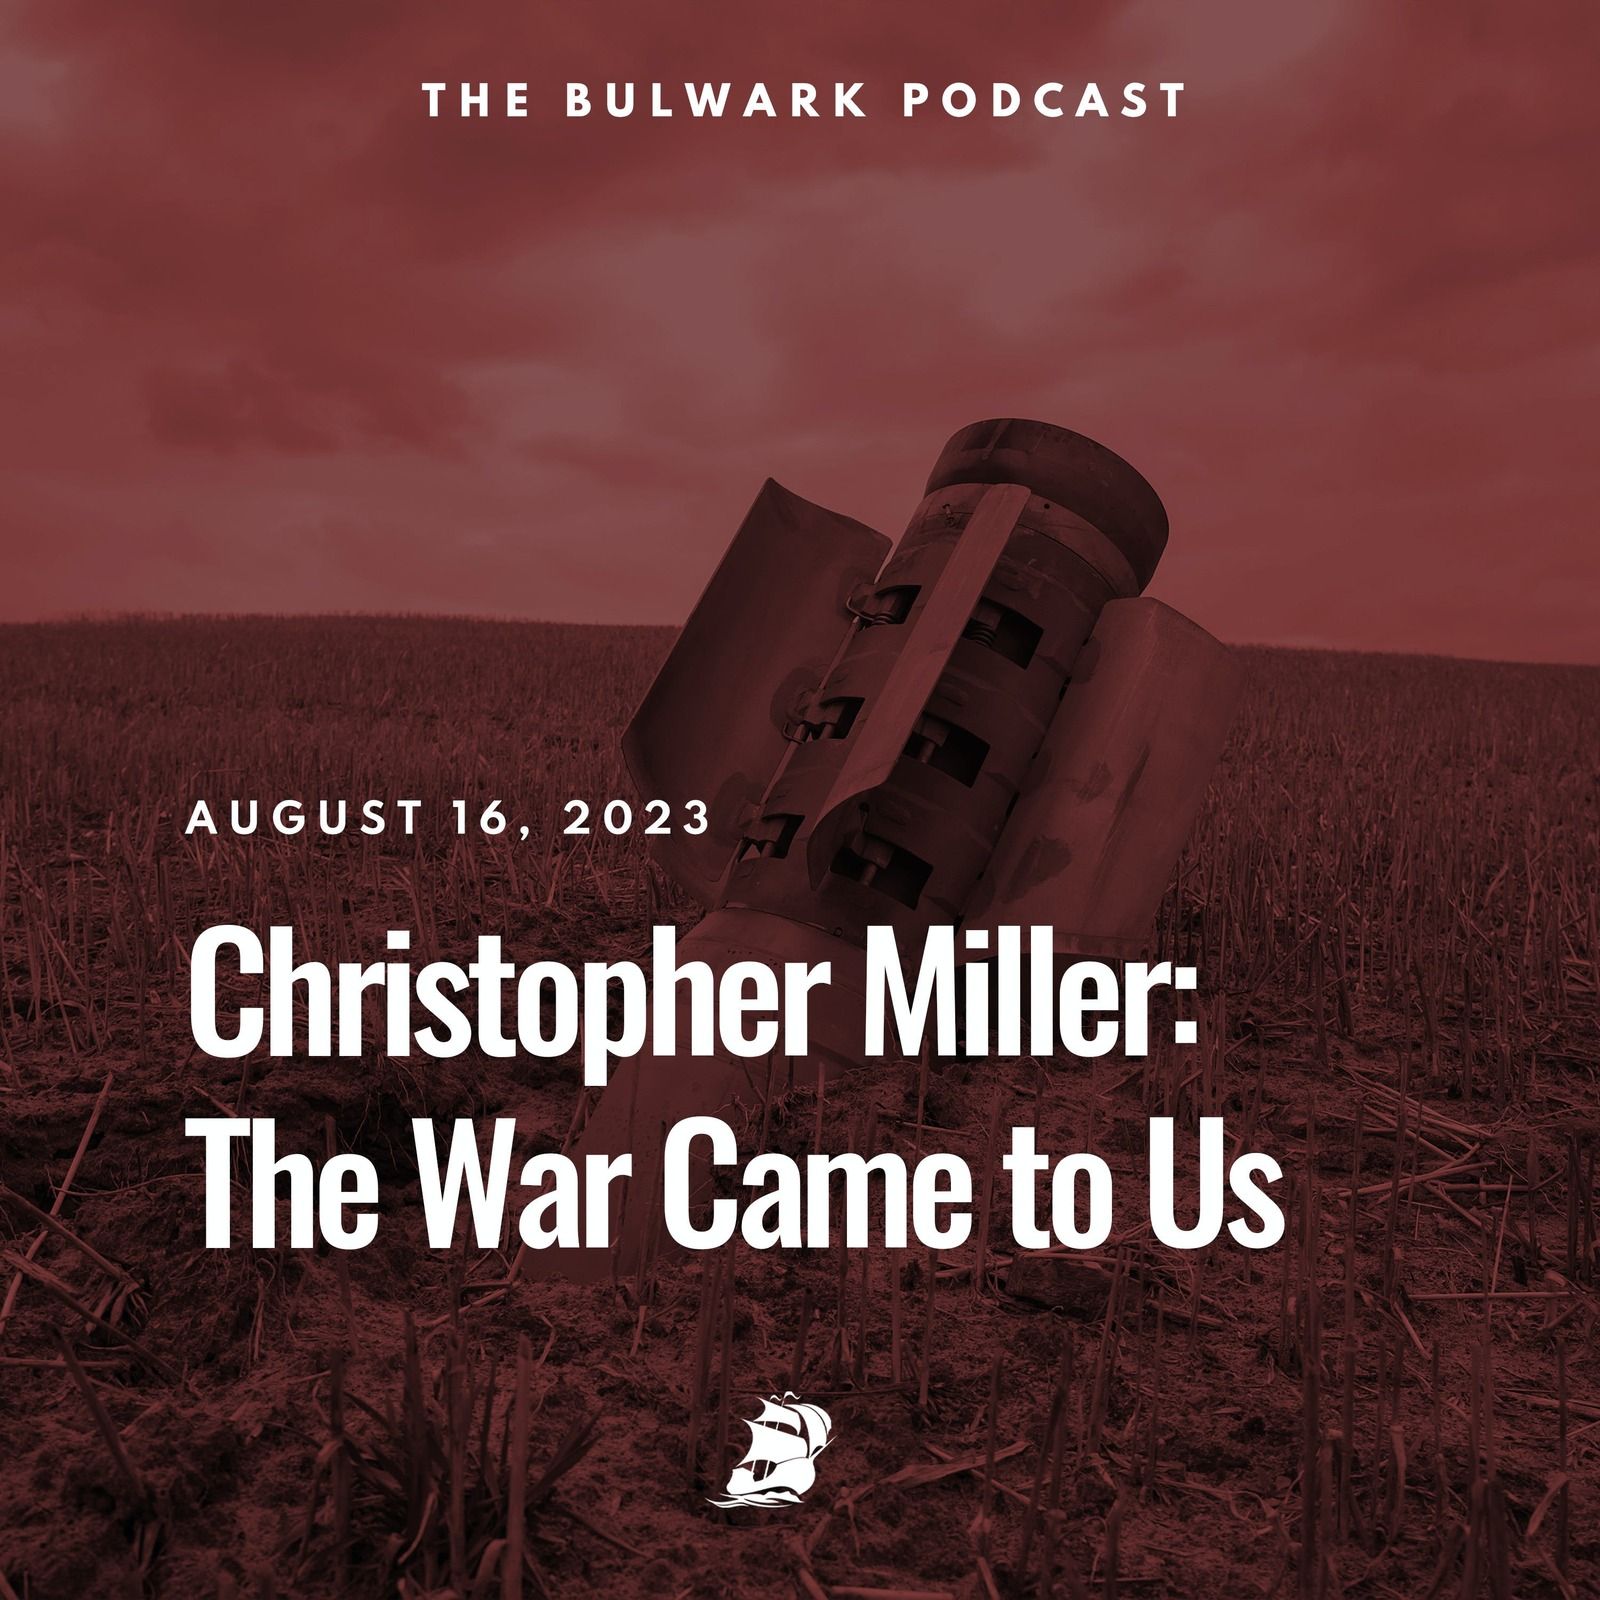 Christopher Miller: The War Came to Us by The Bulwark Podcast